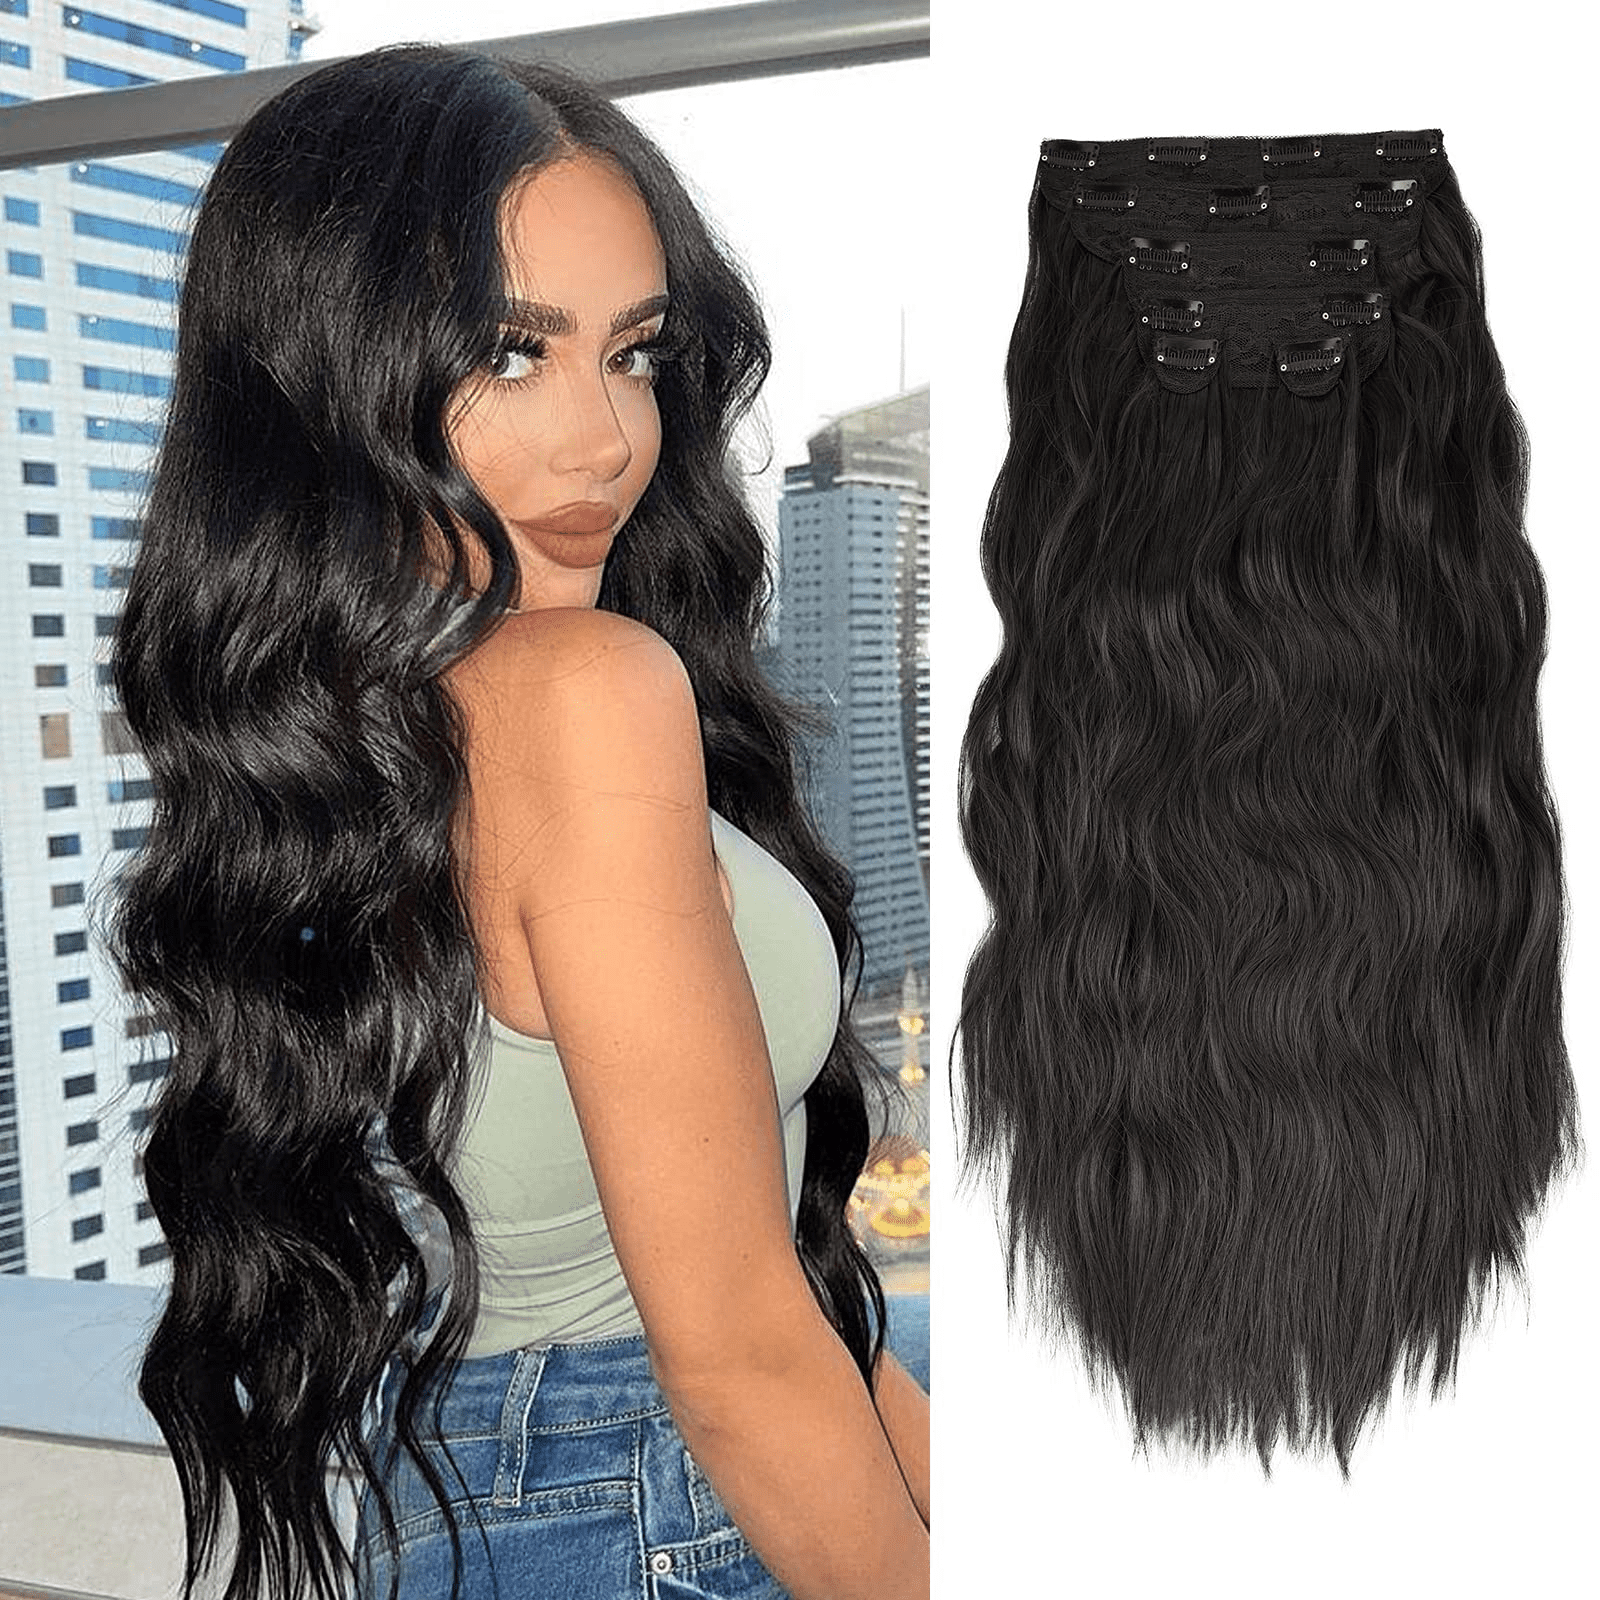 FREEMEIGE Clip in Hair Extensions,Black Hair Extensions for Women Straight Layered Hair Extensions Synthetic Heat Resistant Long Wavy Daily Use 20